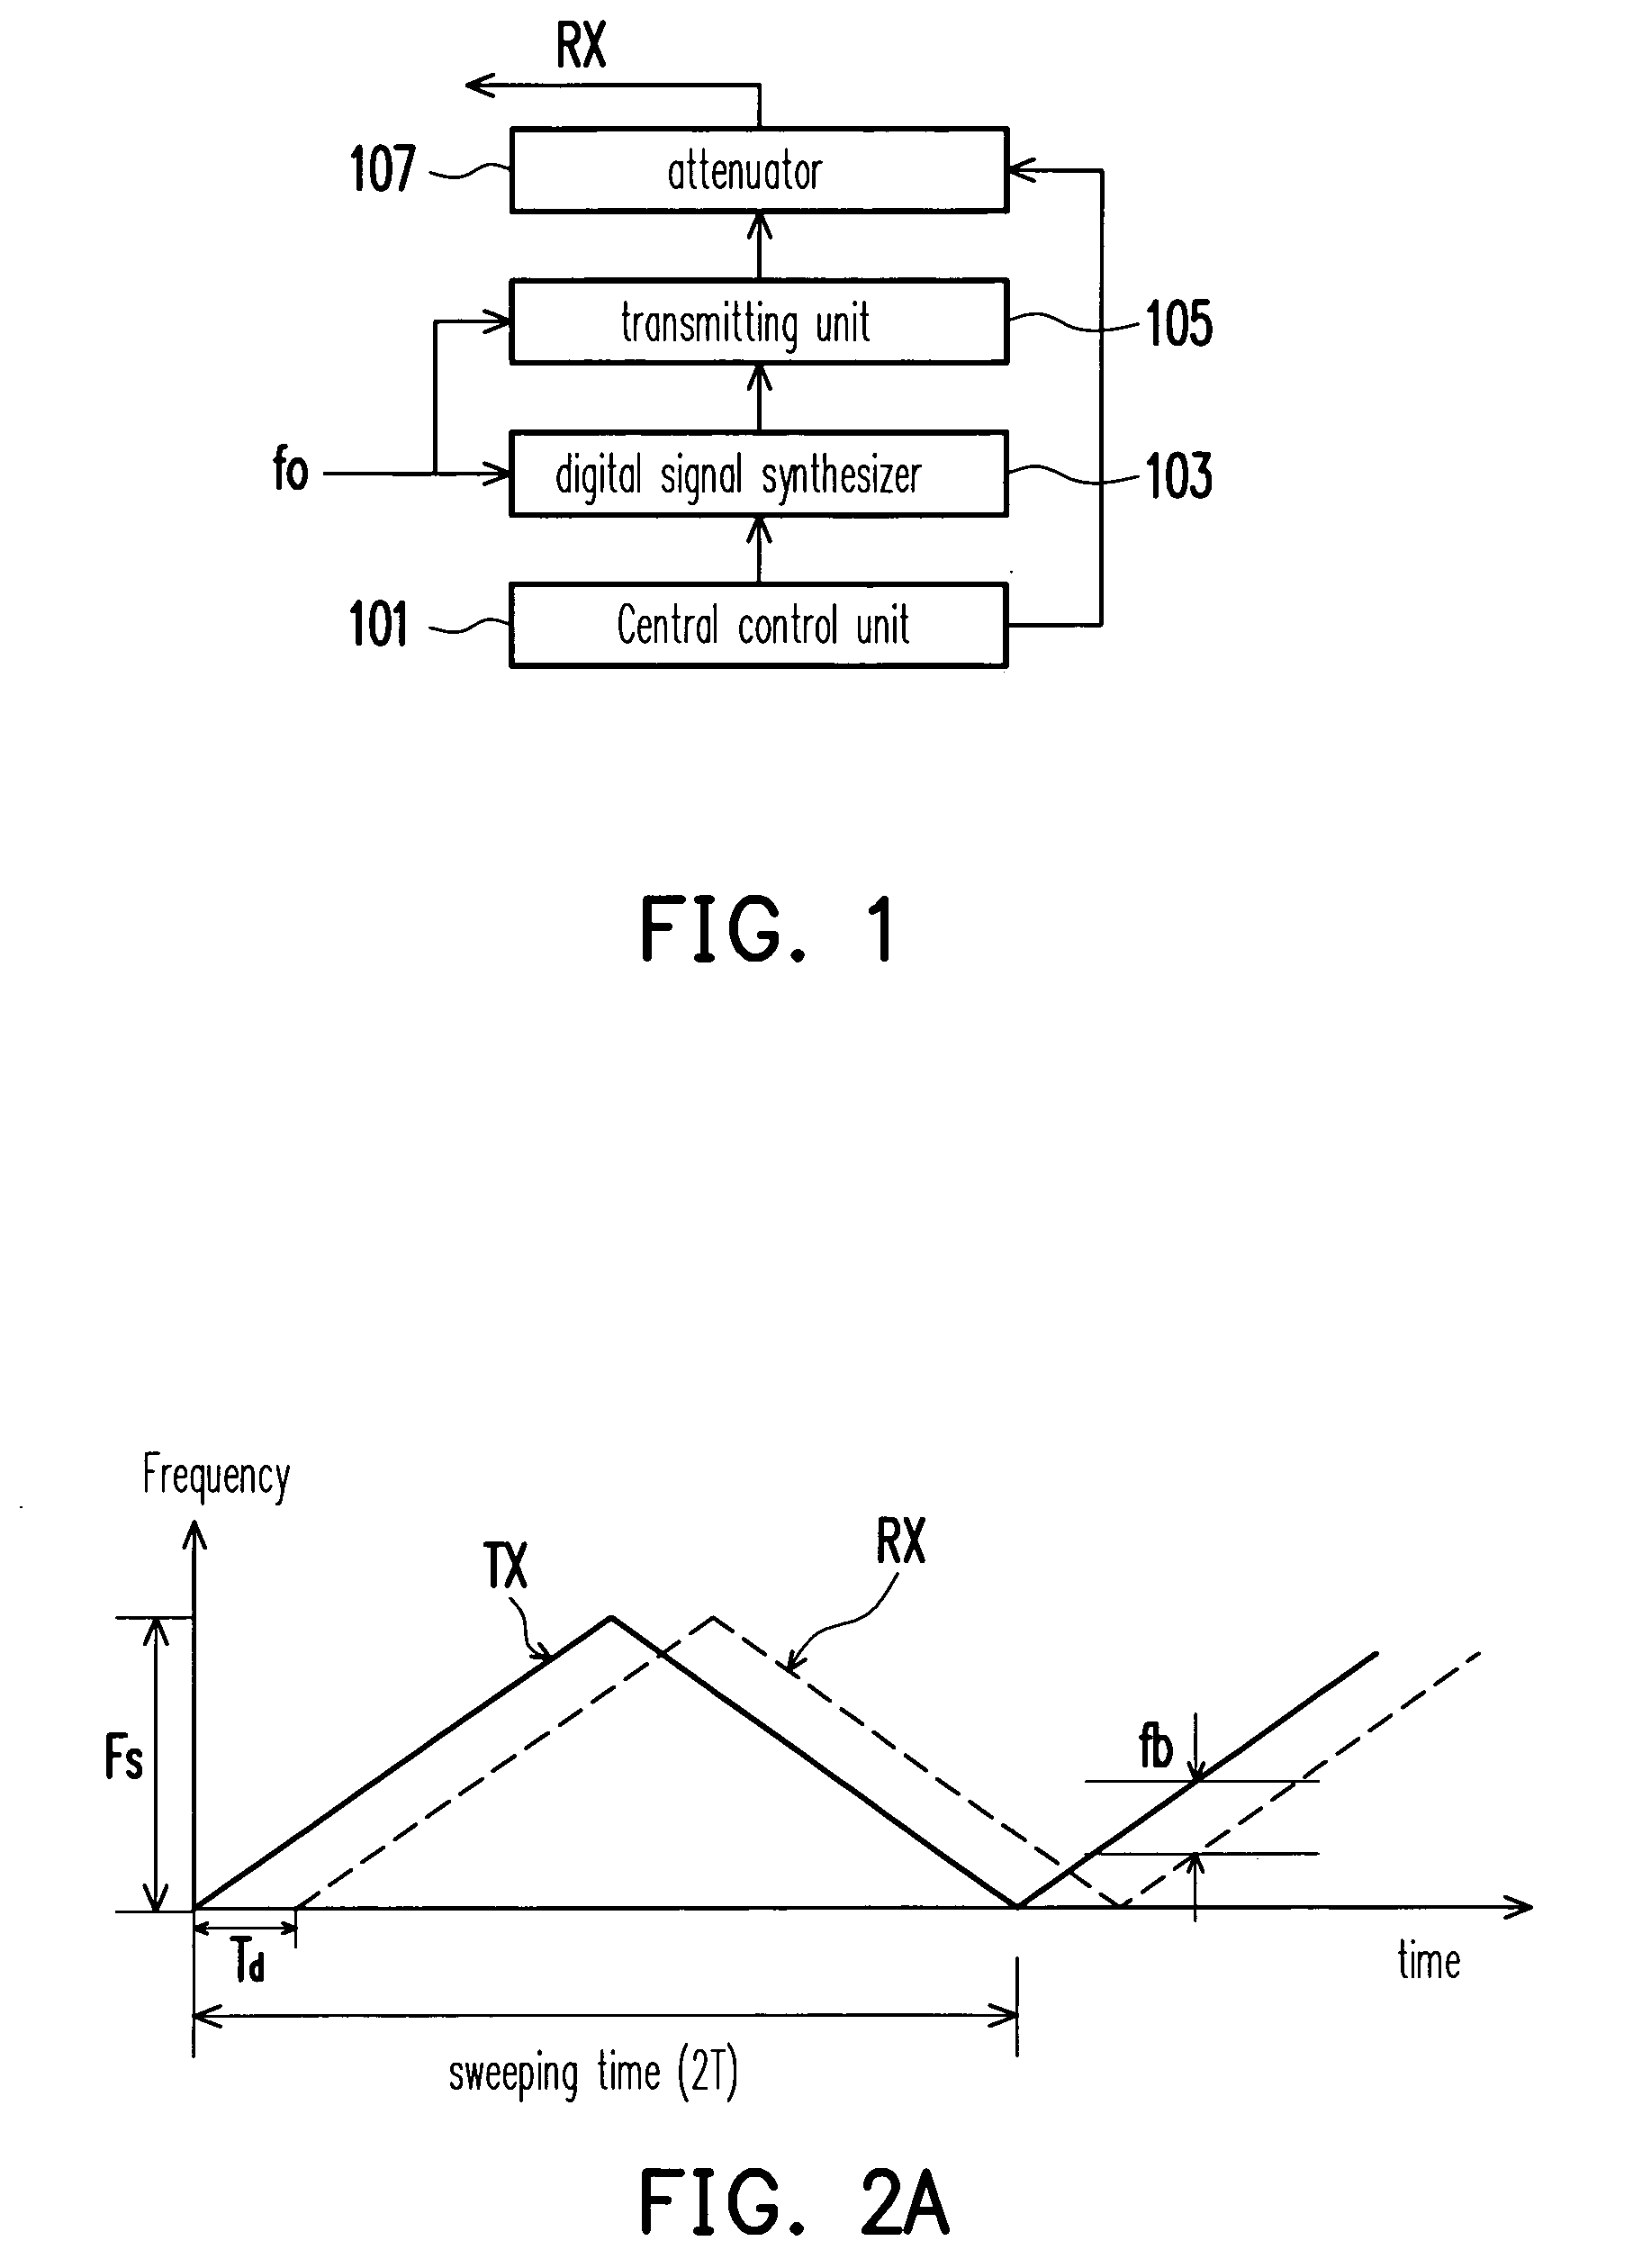 Programmable method and test device for generating target for FMCW radar